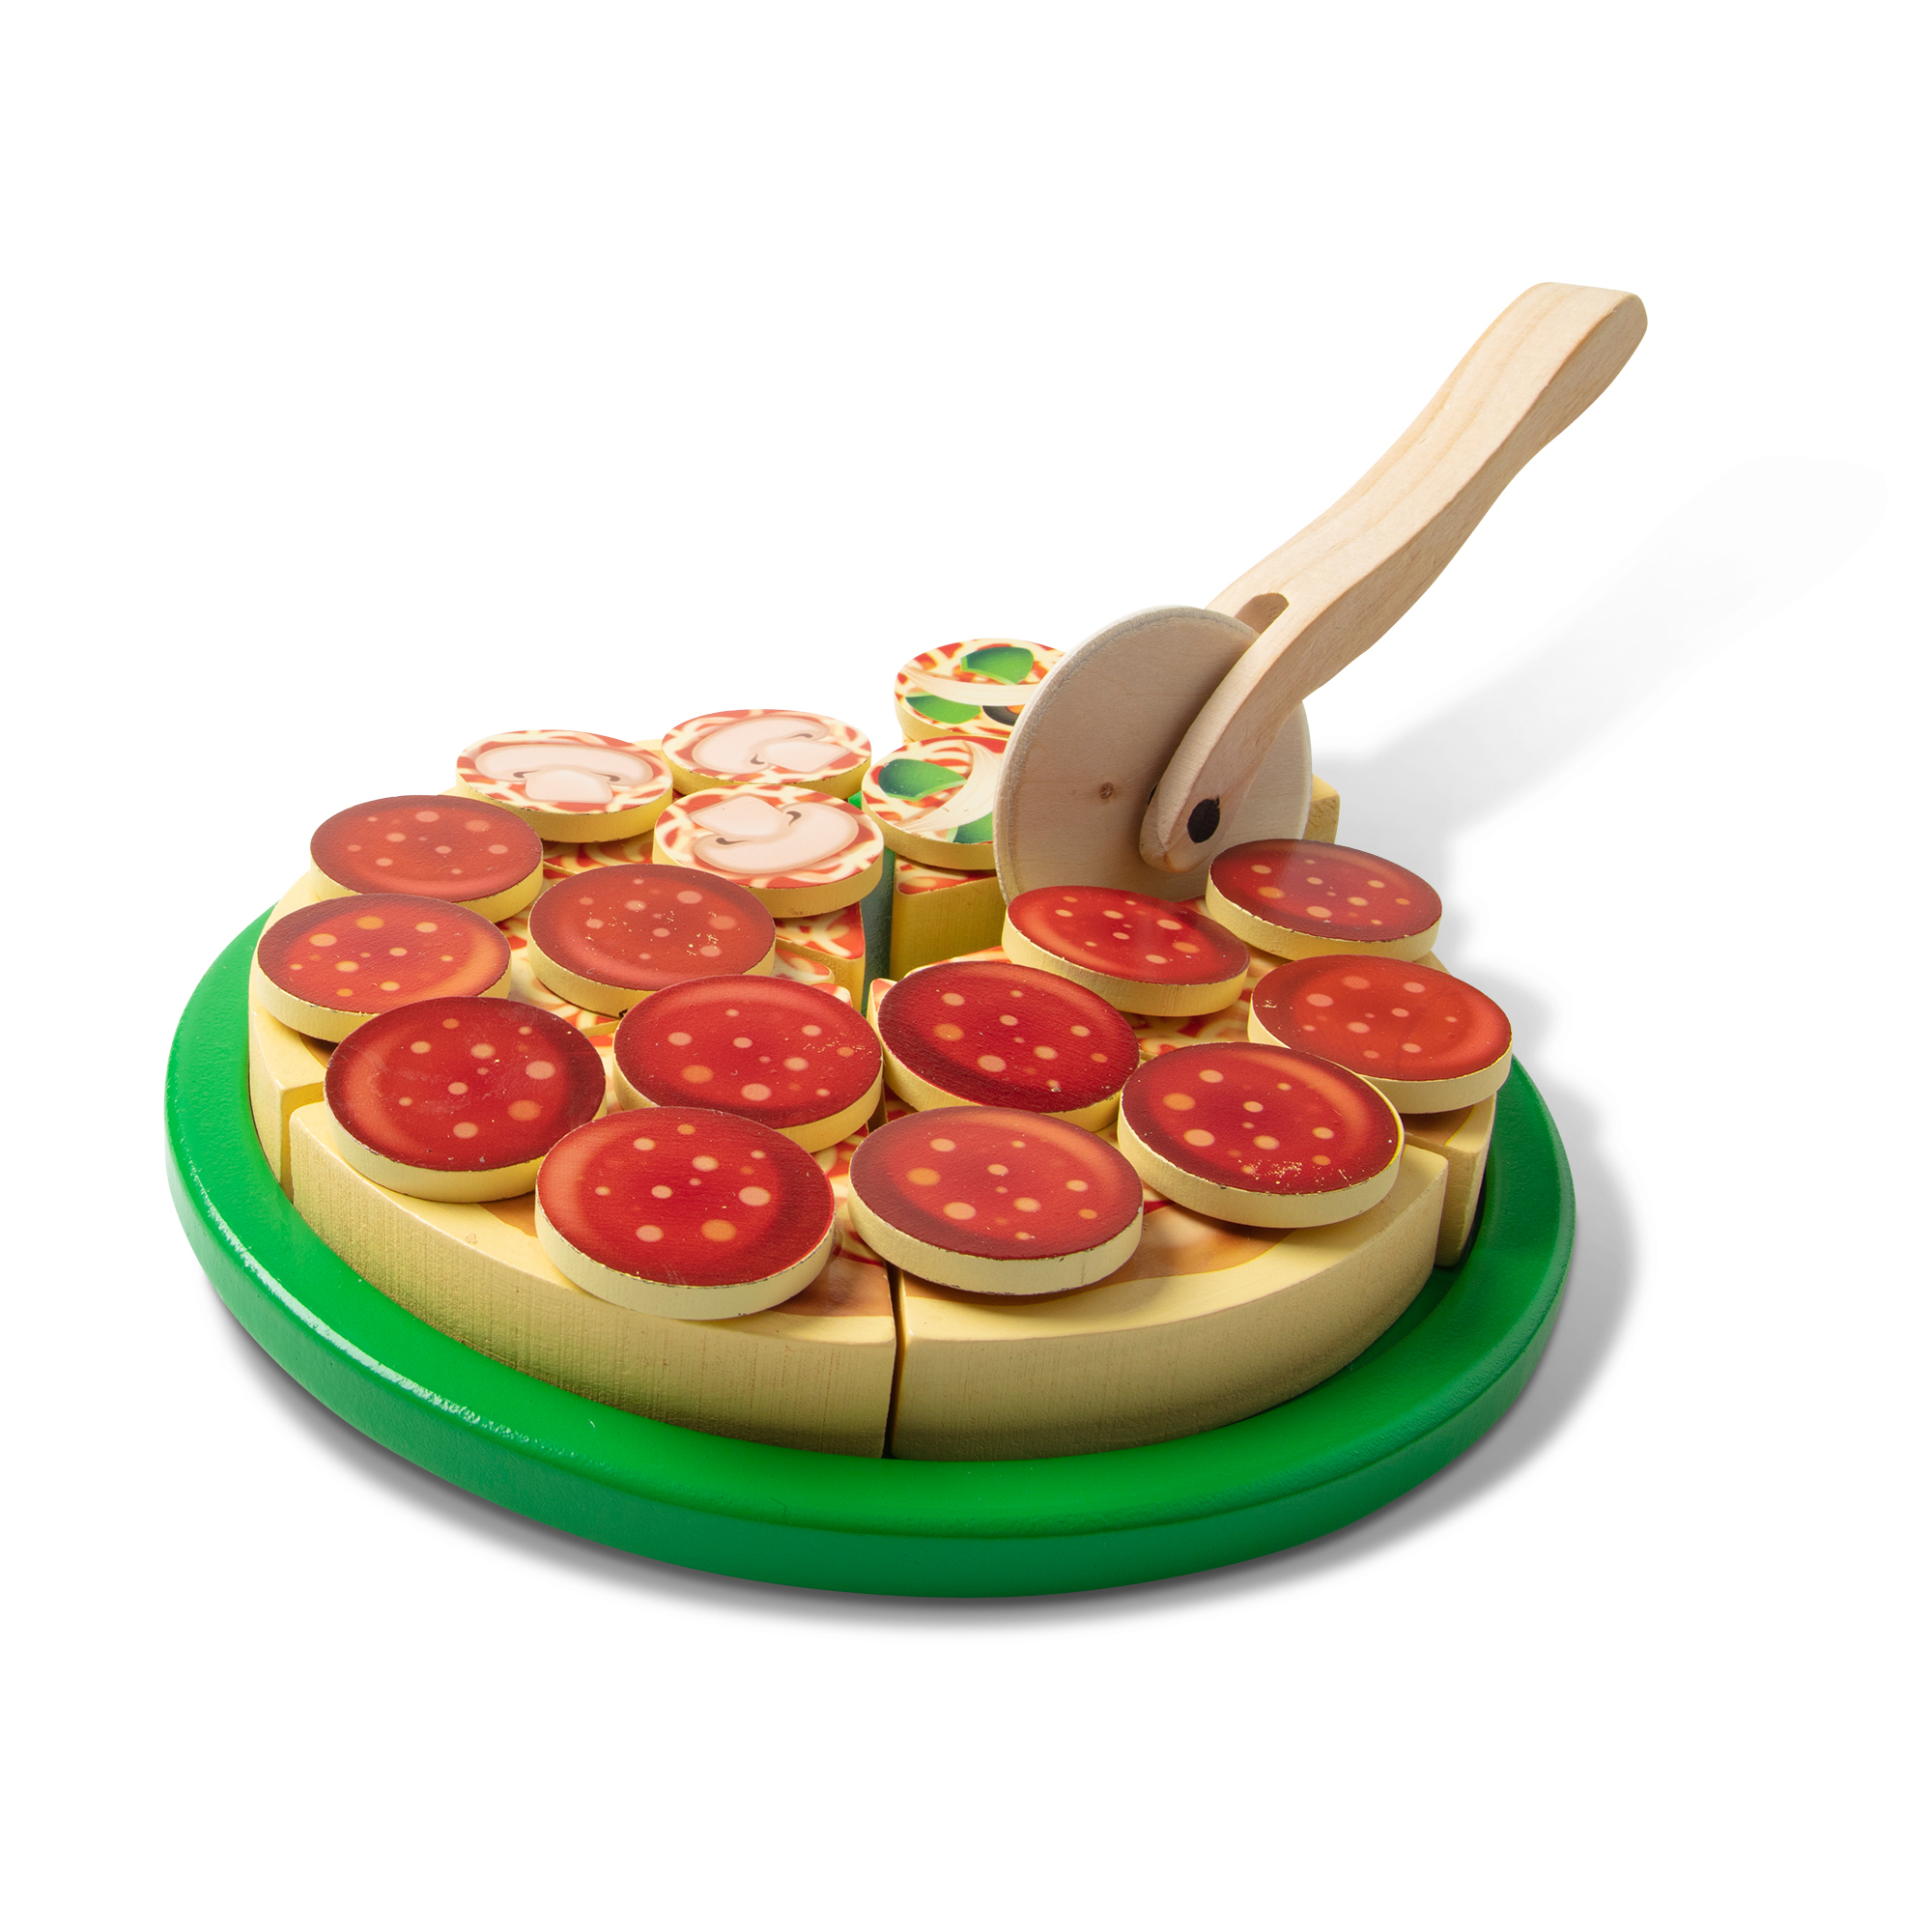 The Teachers' Lounge® | Pizza Party Wooden Play Food Set